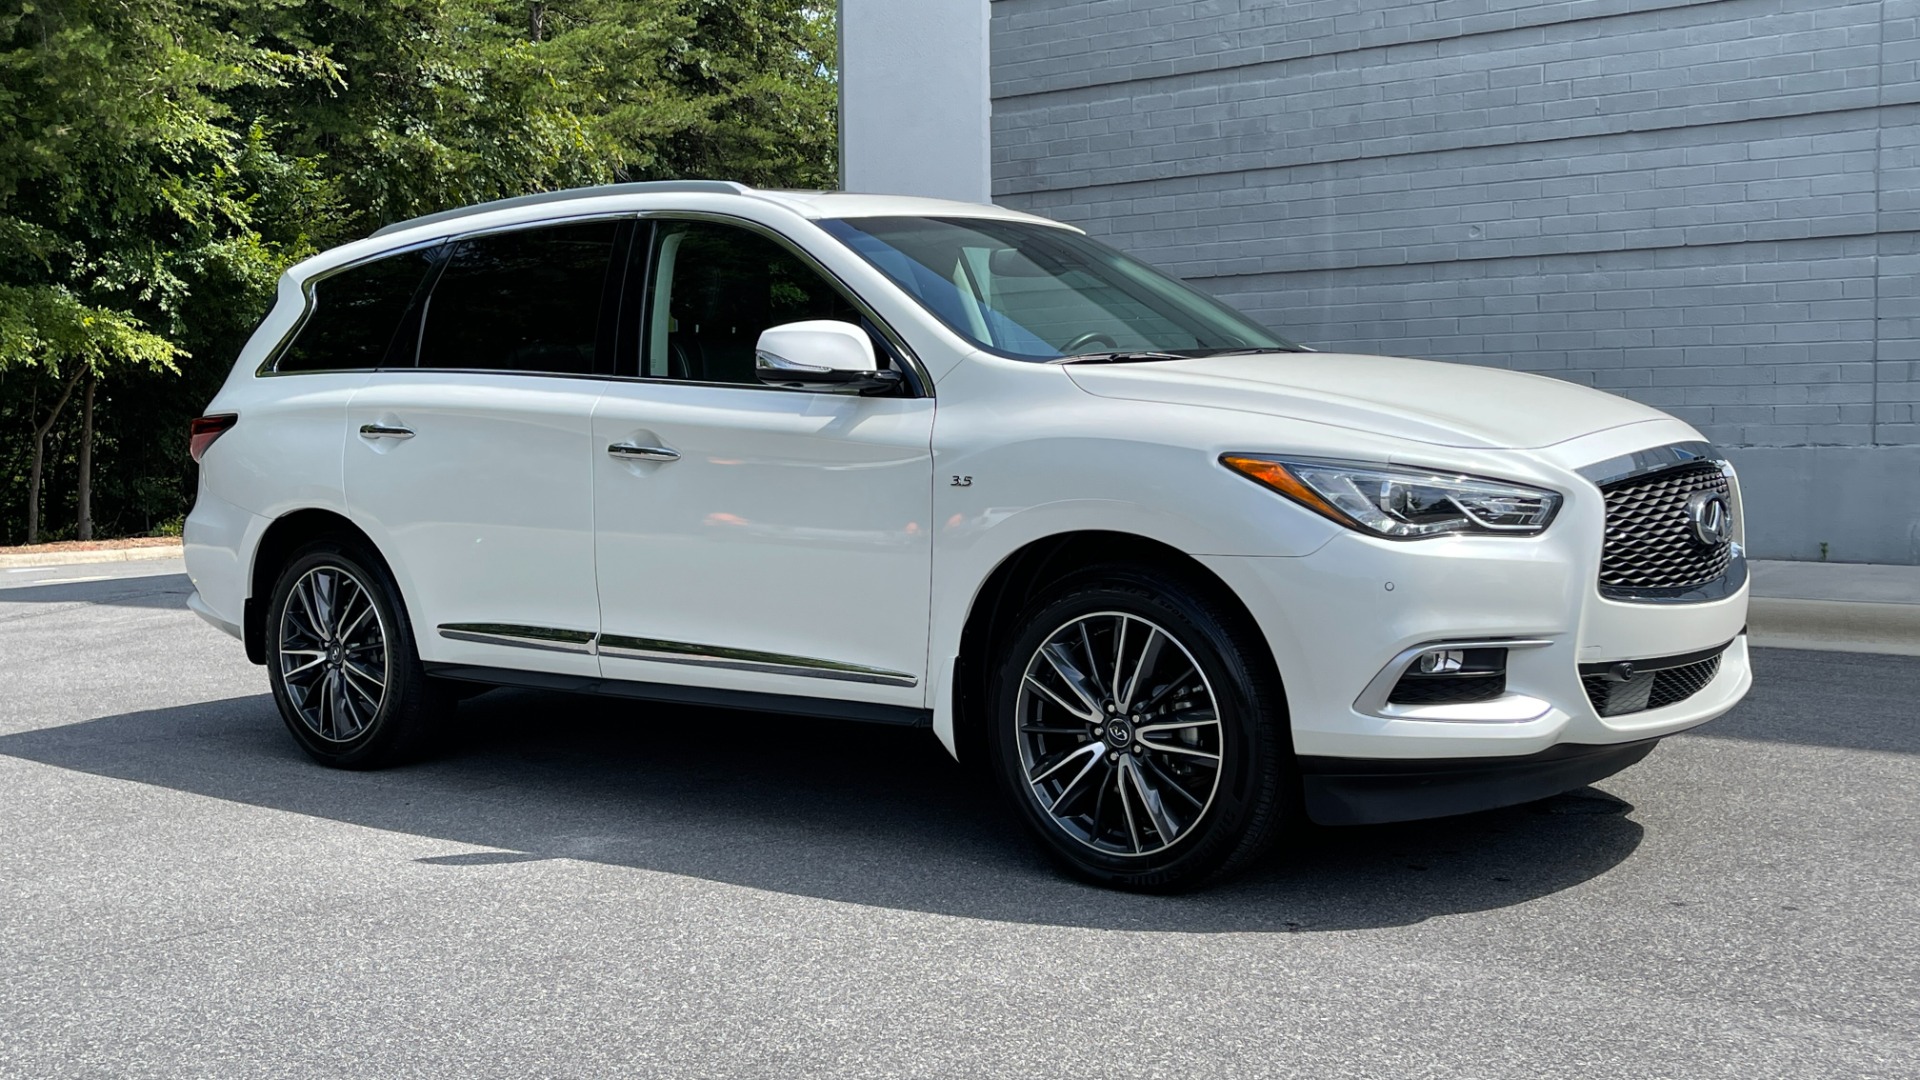 Used 2016 INFINITI QX60 AWD / DVD / 3RD ROW SEATS / DELUXE TECH for sale $27,999 at Formula Imports in Charlotte NC 28227 7